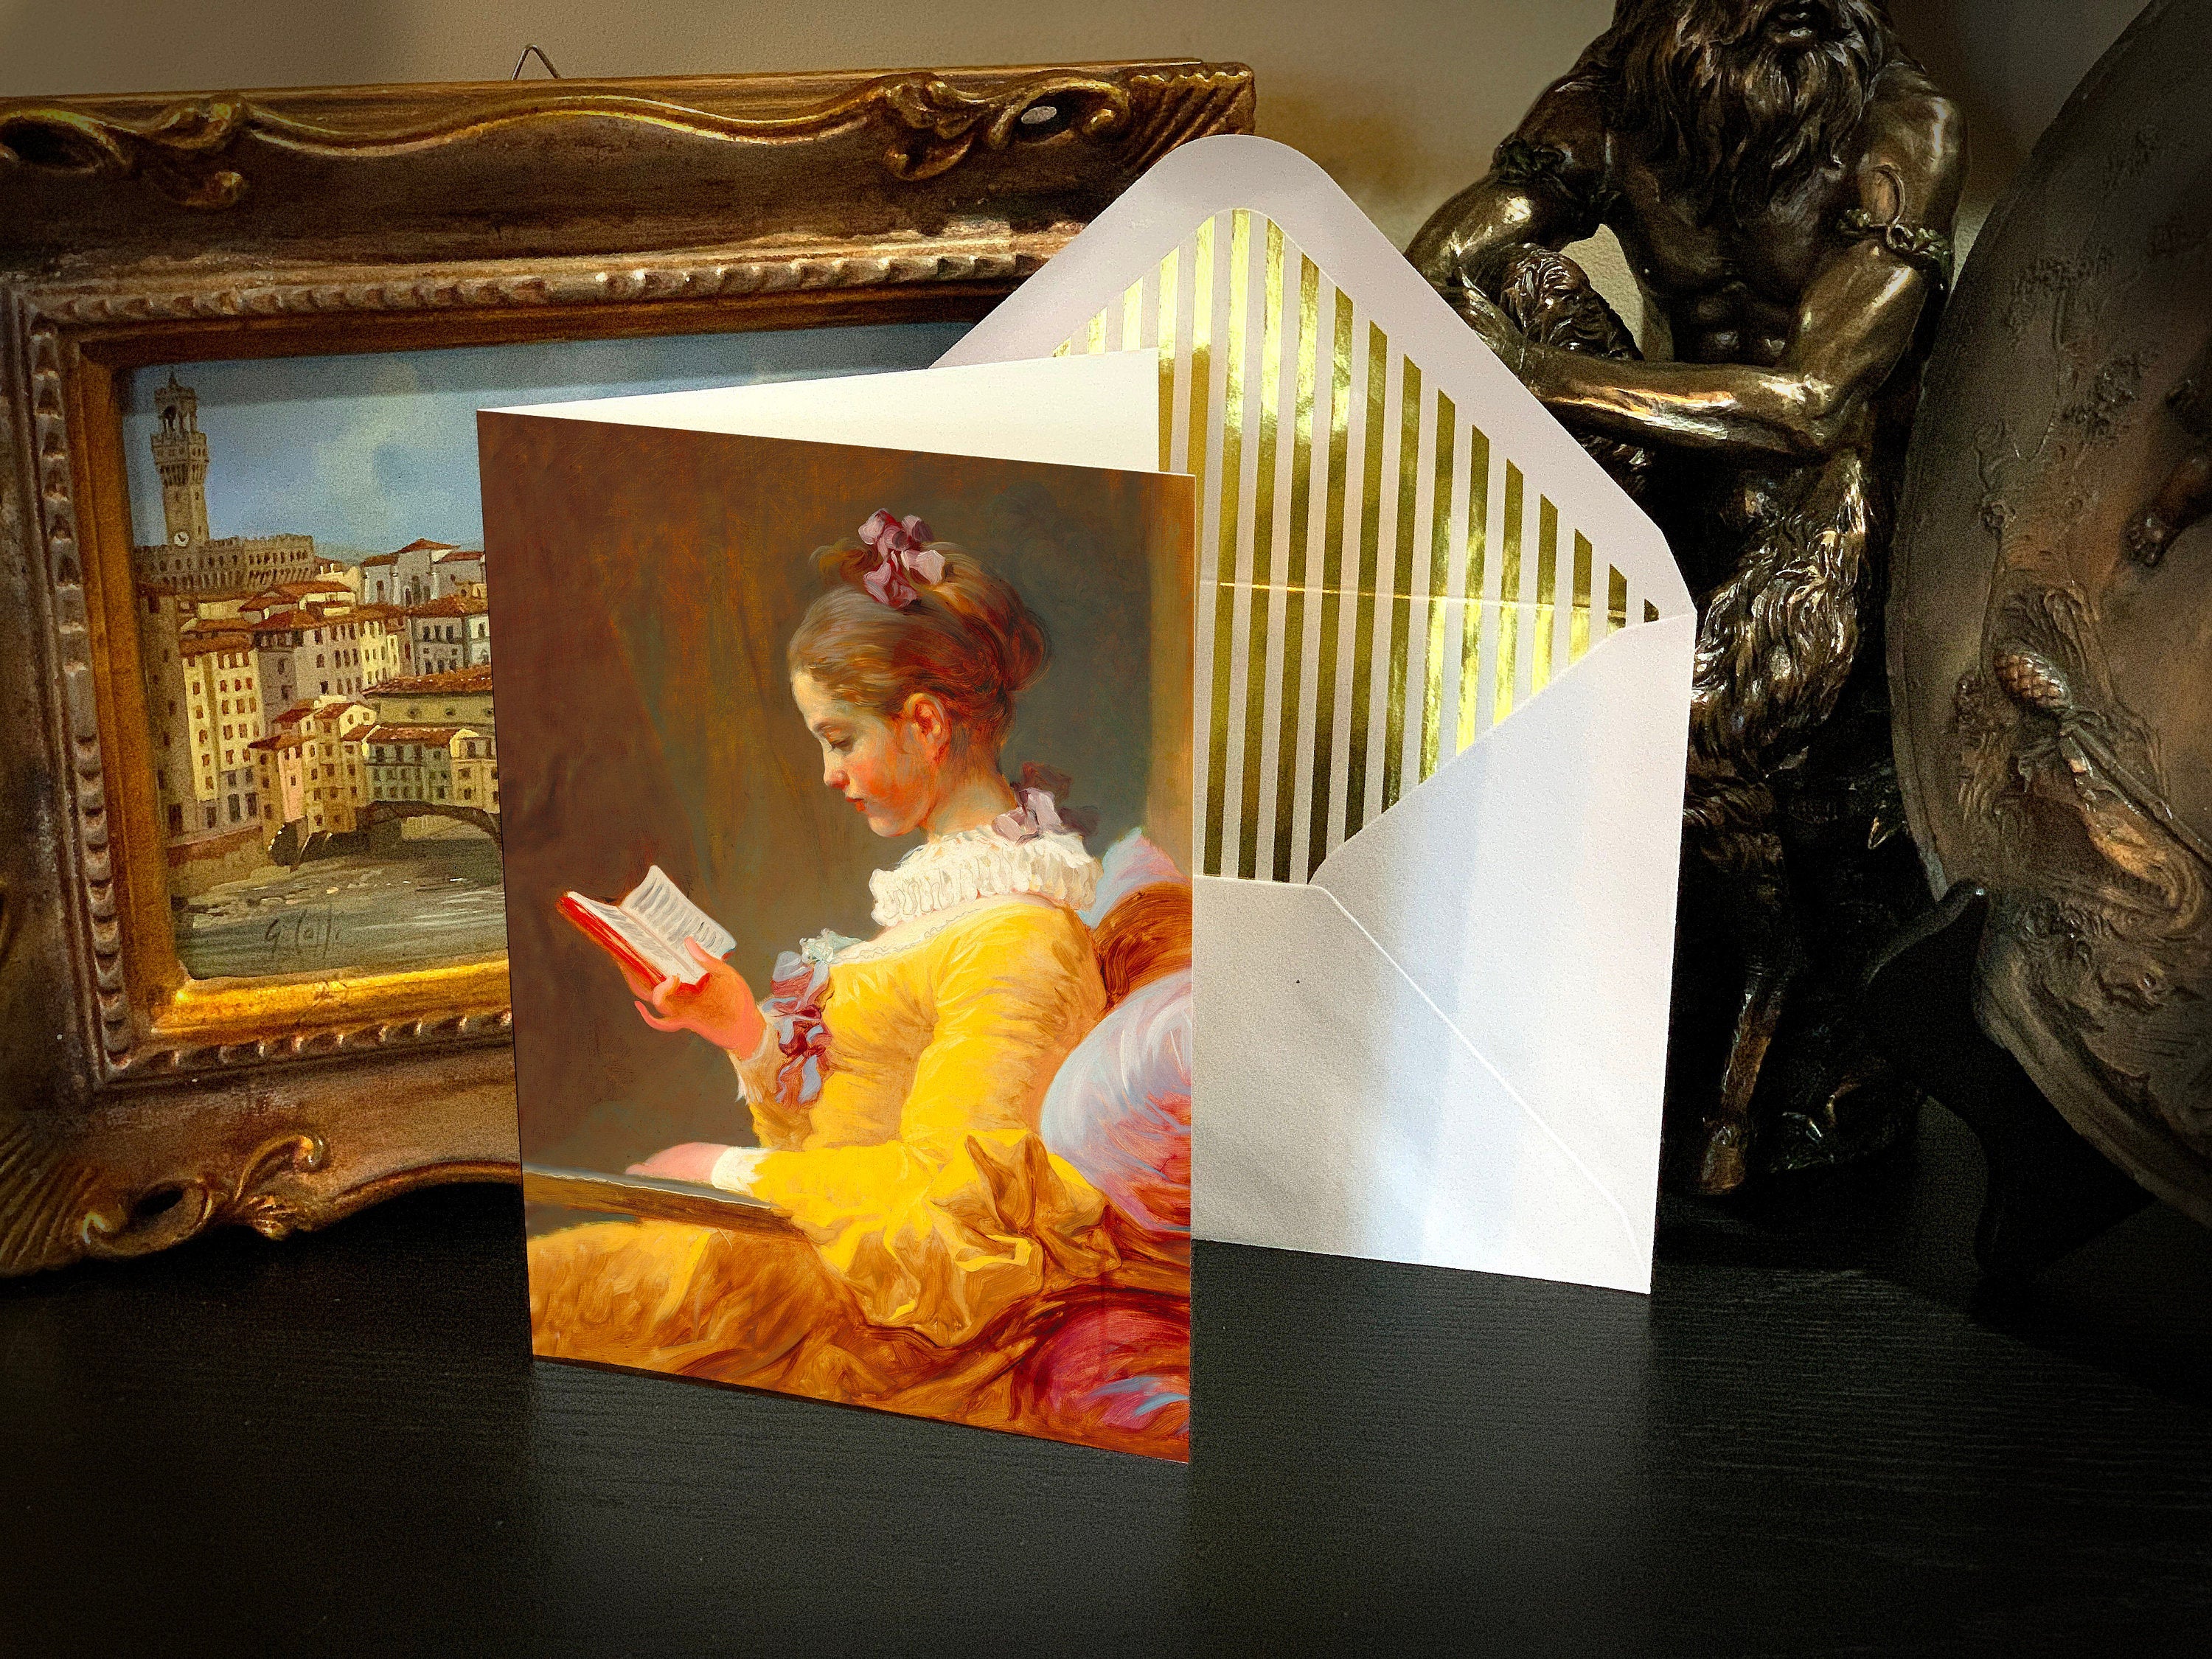 Young Girl Reading, Bookish Greeting Card with Elegant Striped Gold Foil Envelope, 1 Card/Envelope